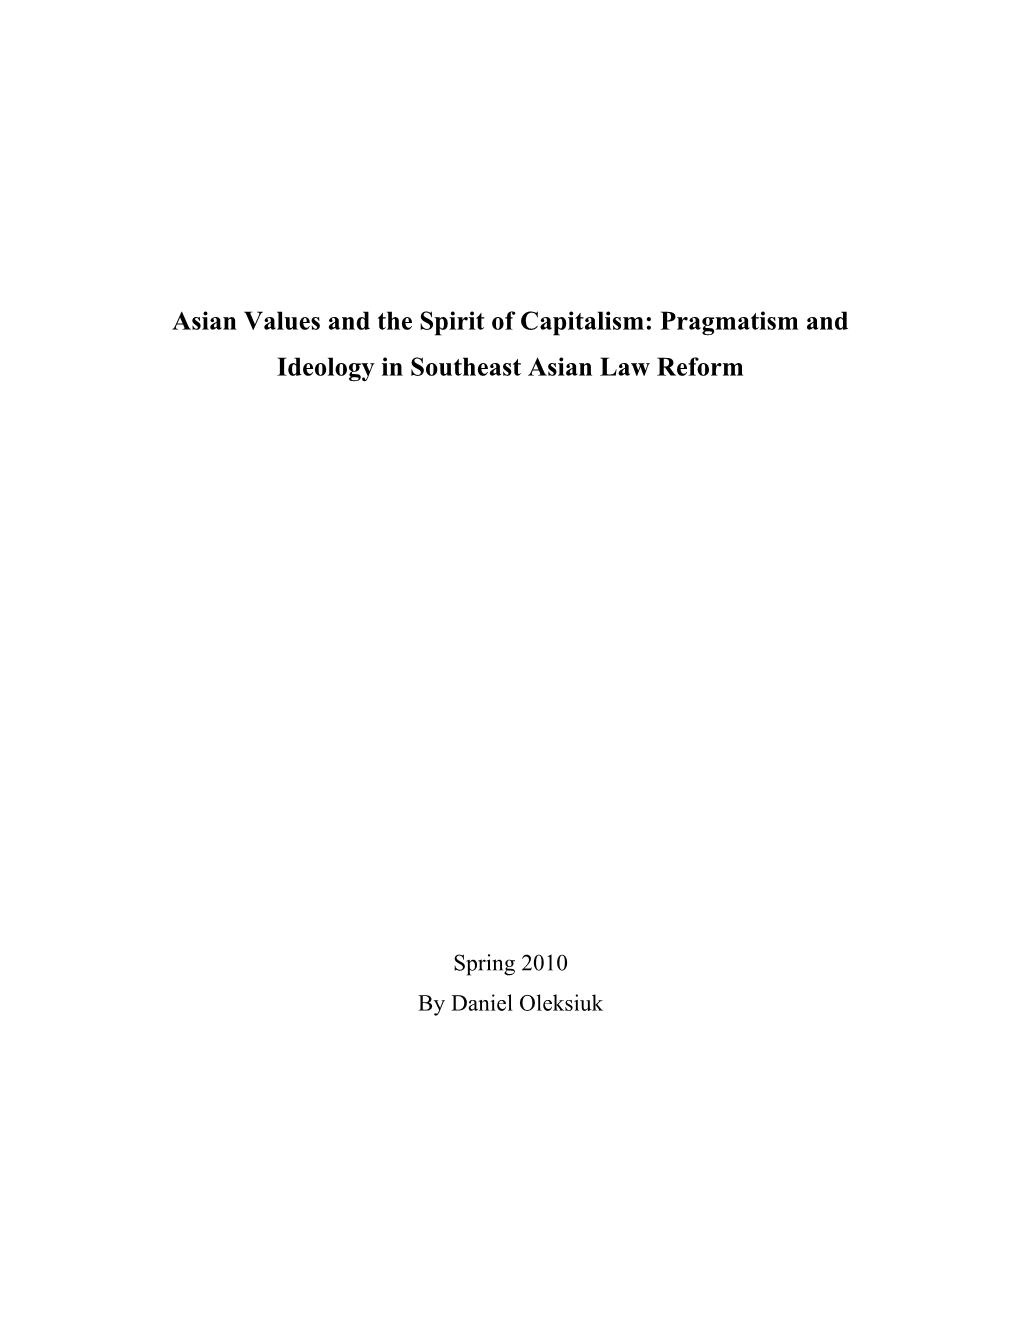 Asian Values and the Spirit of Capitalism: Pragmatism and Ideology in Southeast Asian Law Reform